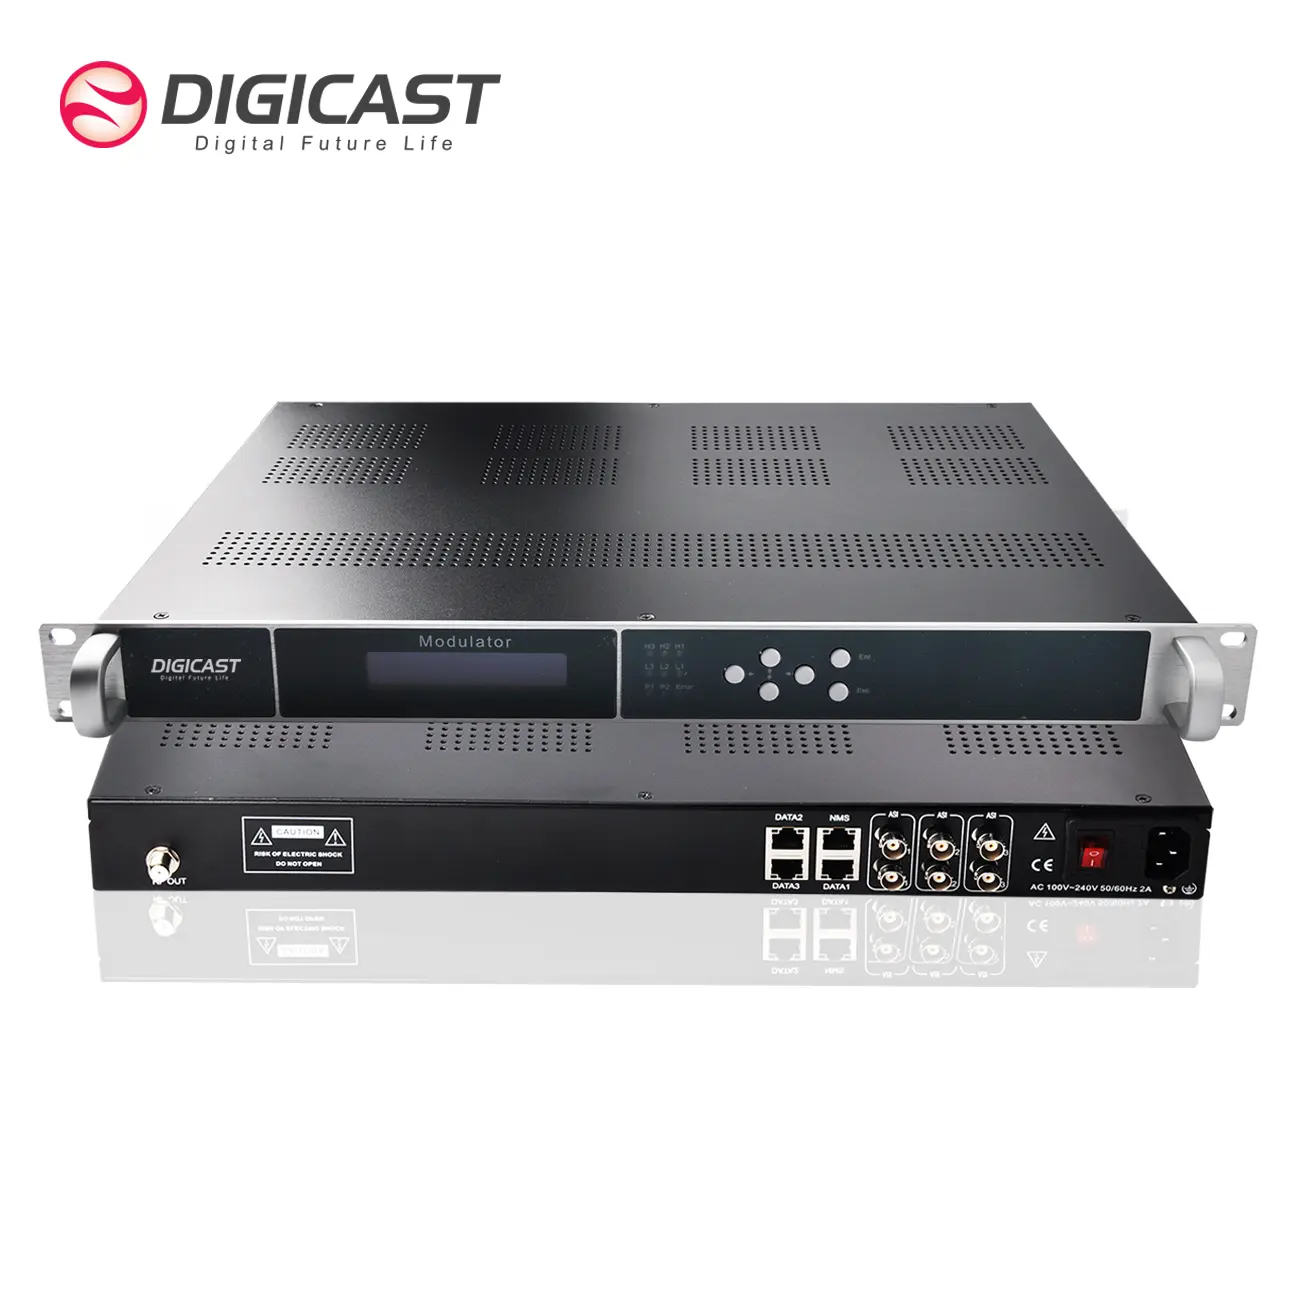 DMB-24E IP To RF IP QAM Modulator TV With 1MPTS/128SPTS Input And 4 RF Output for Digital TV Broadcasting